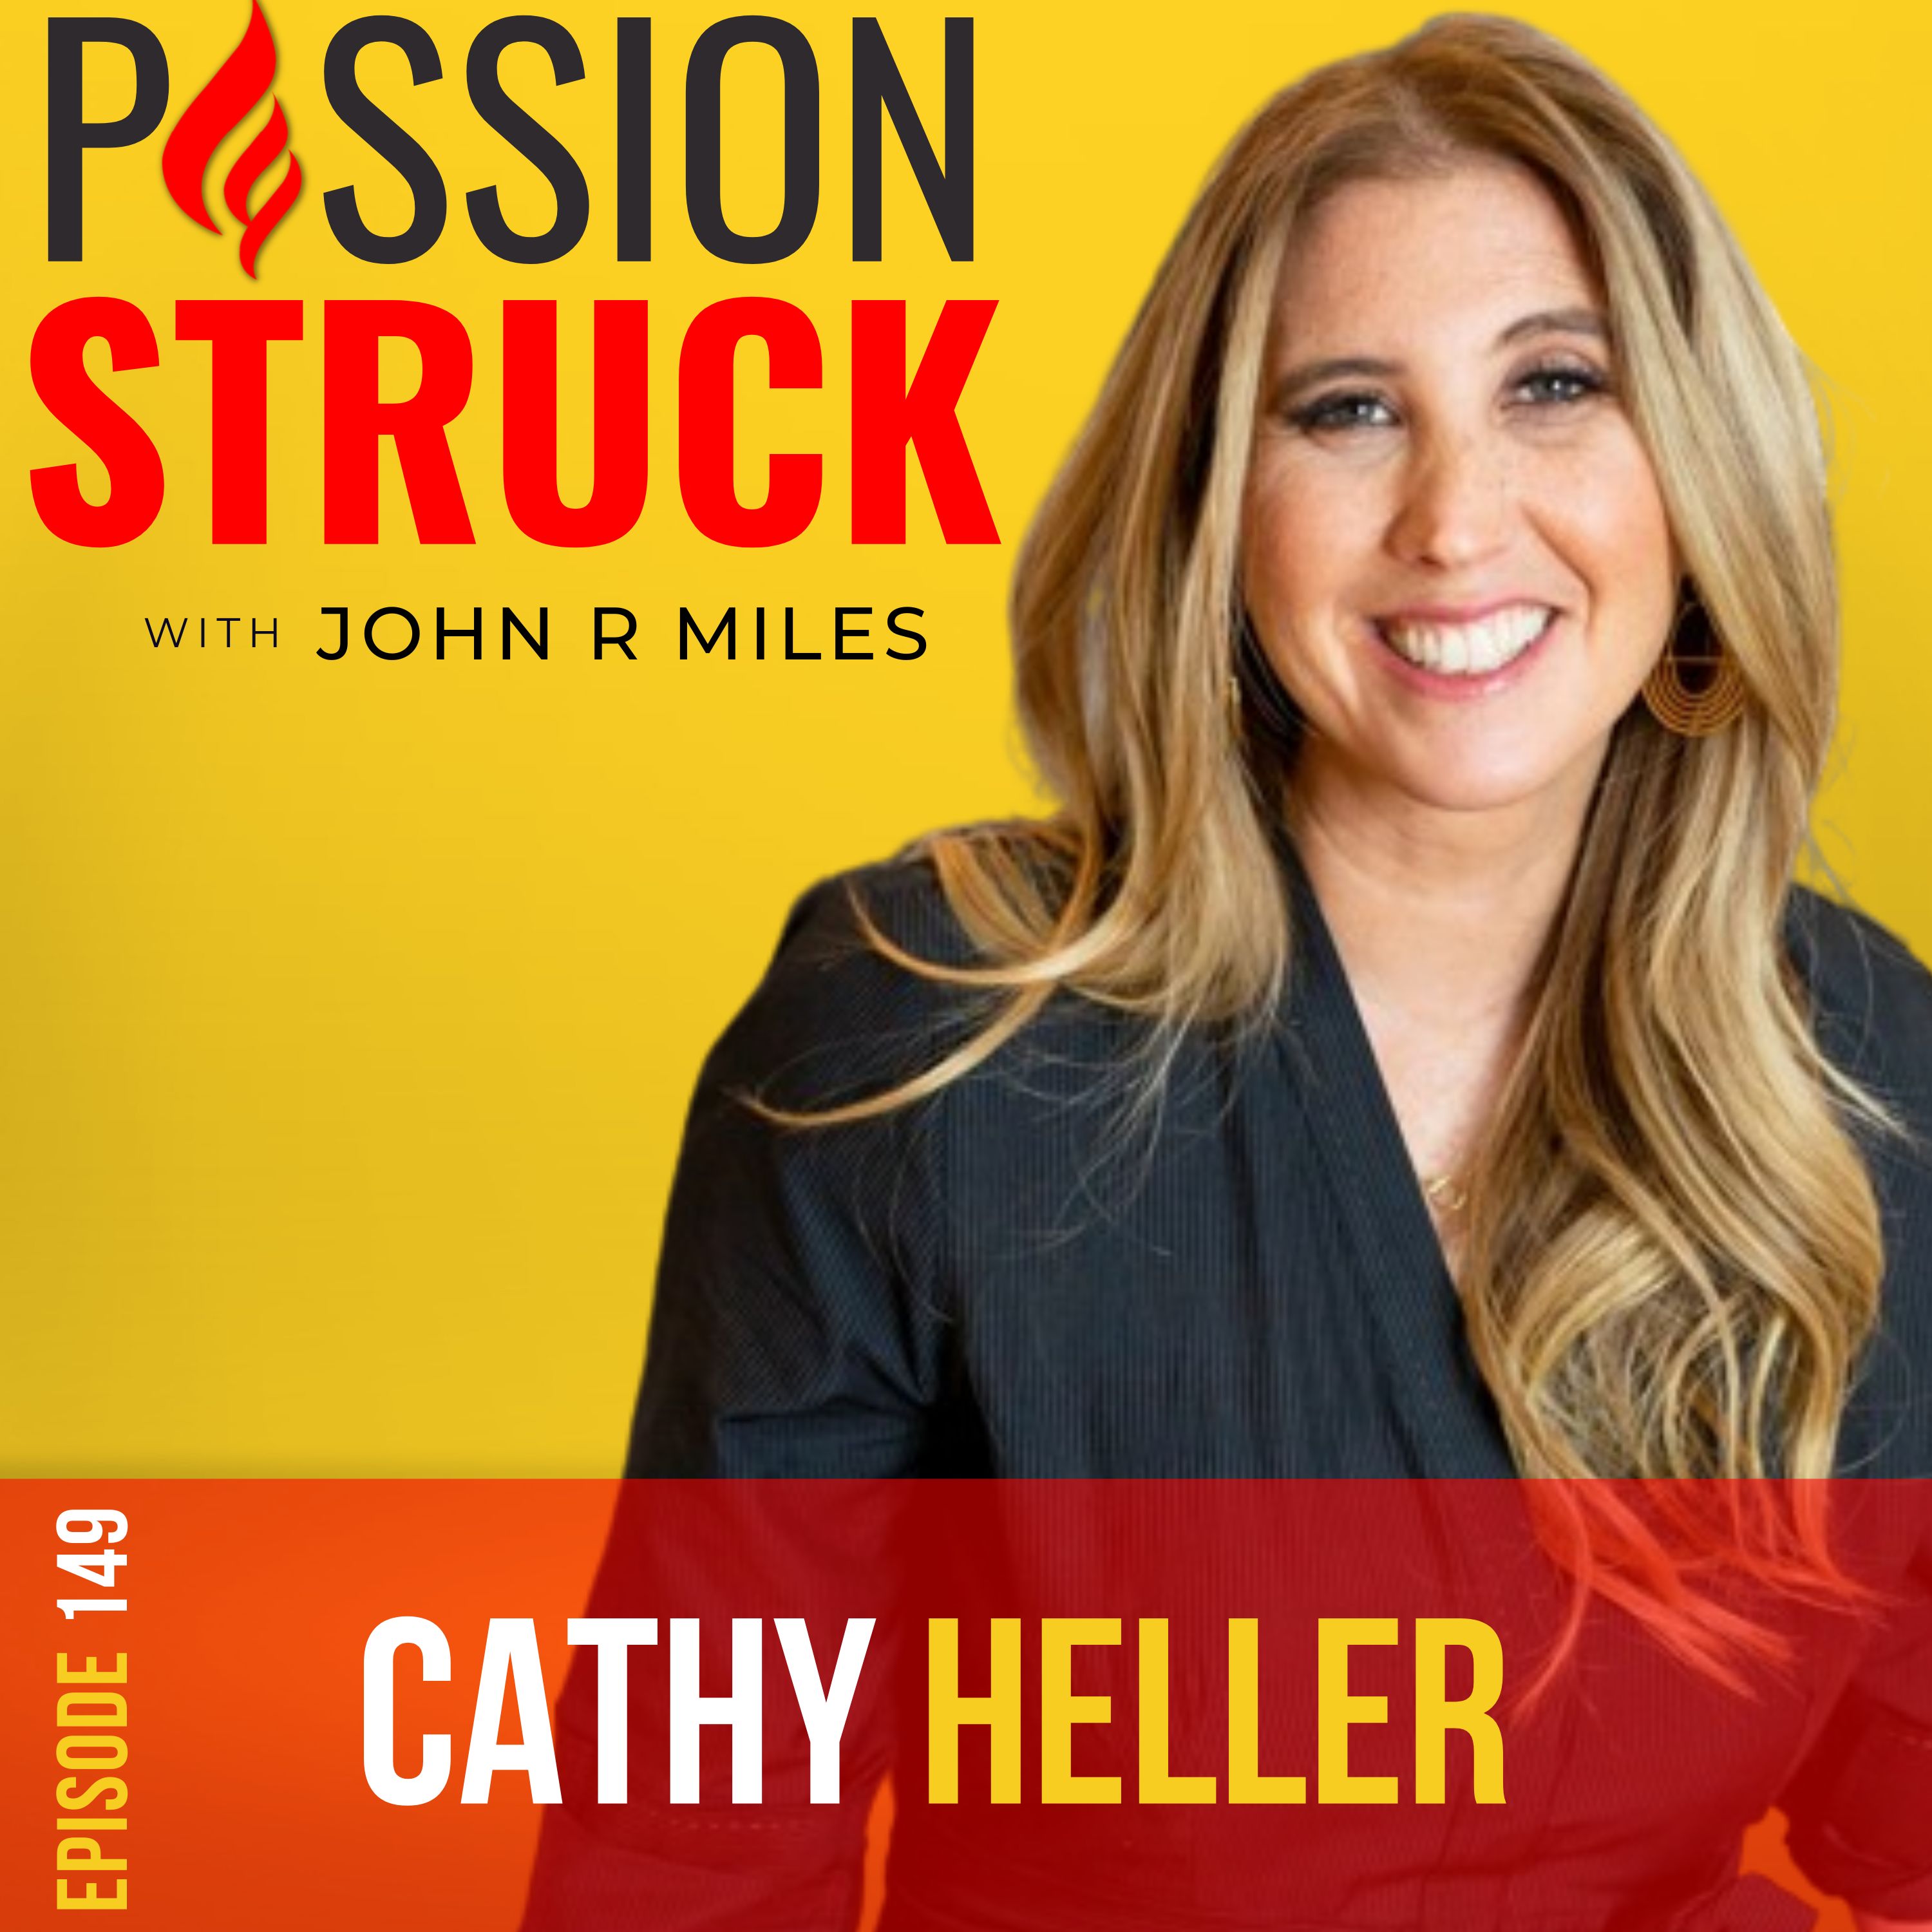 Passion Struck with John R. Miles album cover for episode 149 with Cathy Heller